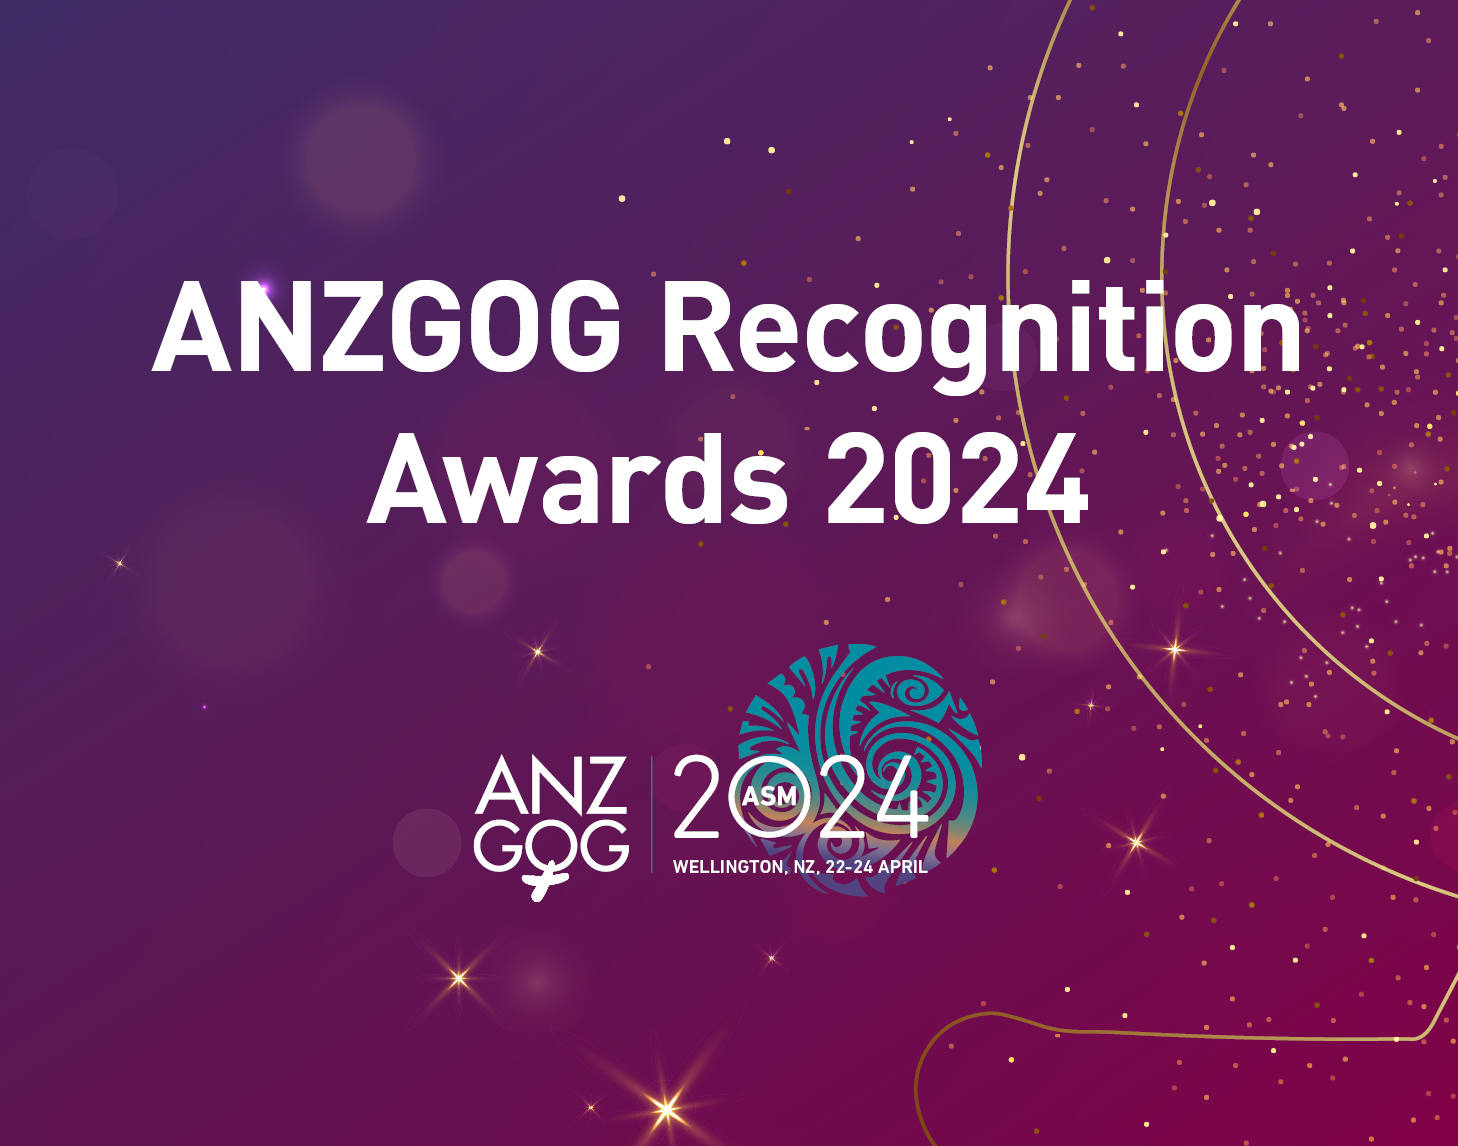 Nominations open for ANZGOG Recognition Awards